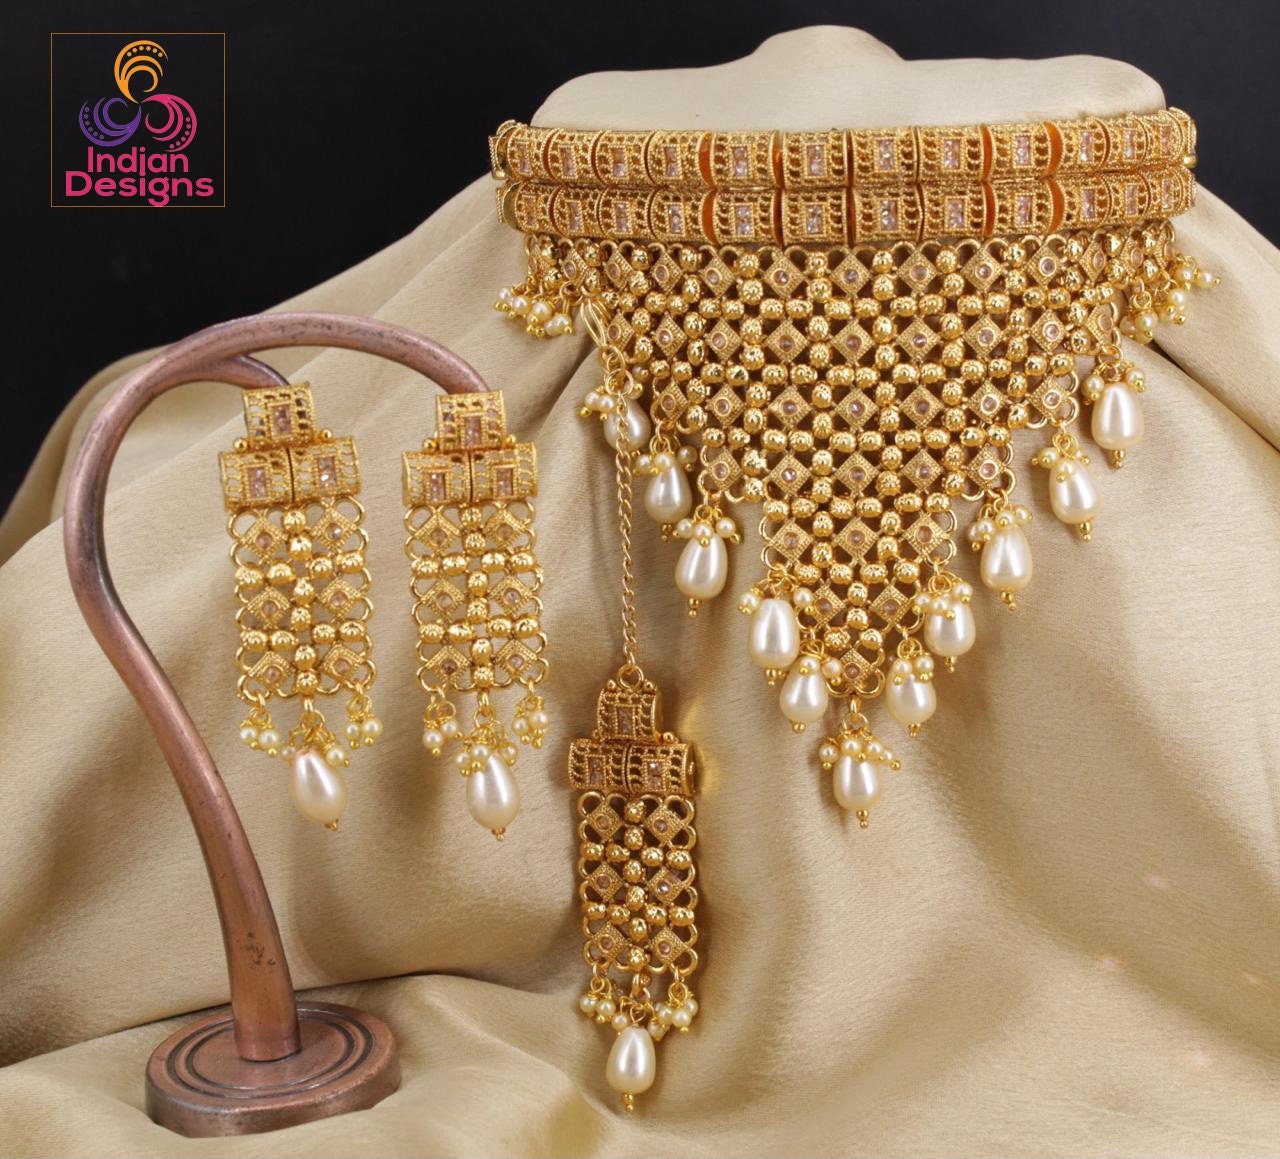 Gold Plated Indian Jewelry necklace with maang tikka | Indian choker necklace gold design | Polki choker and tikka | South Indian jewelry